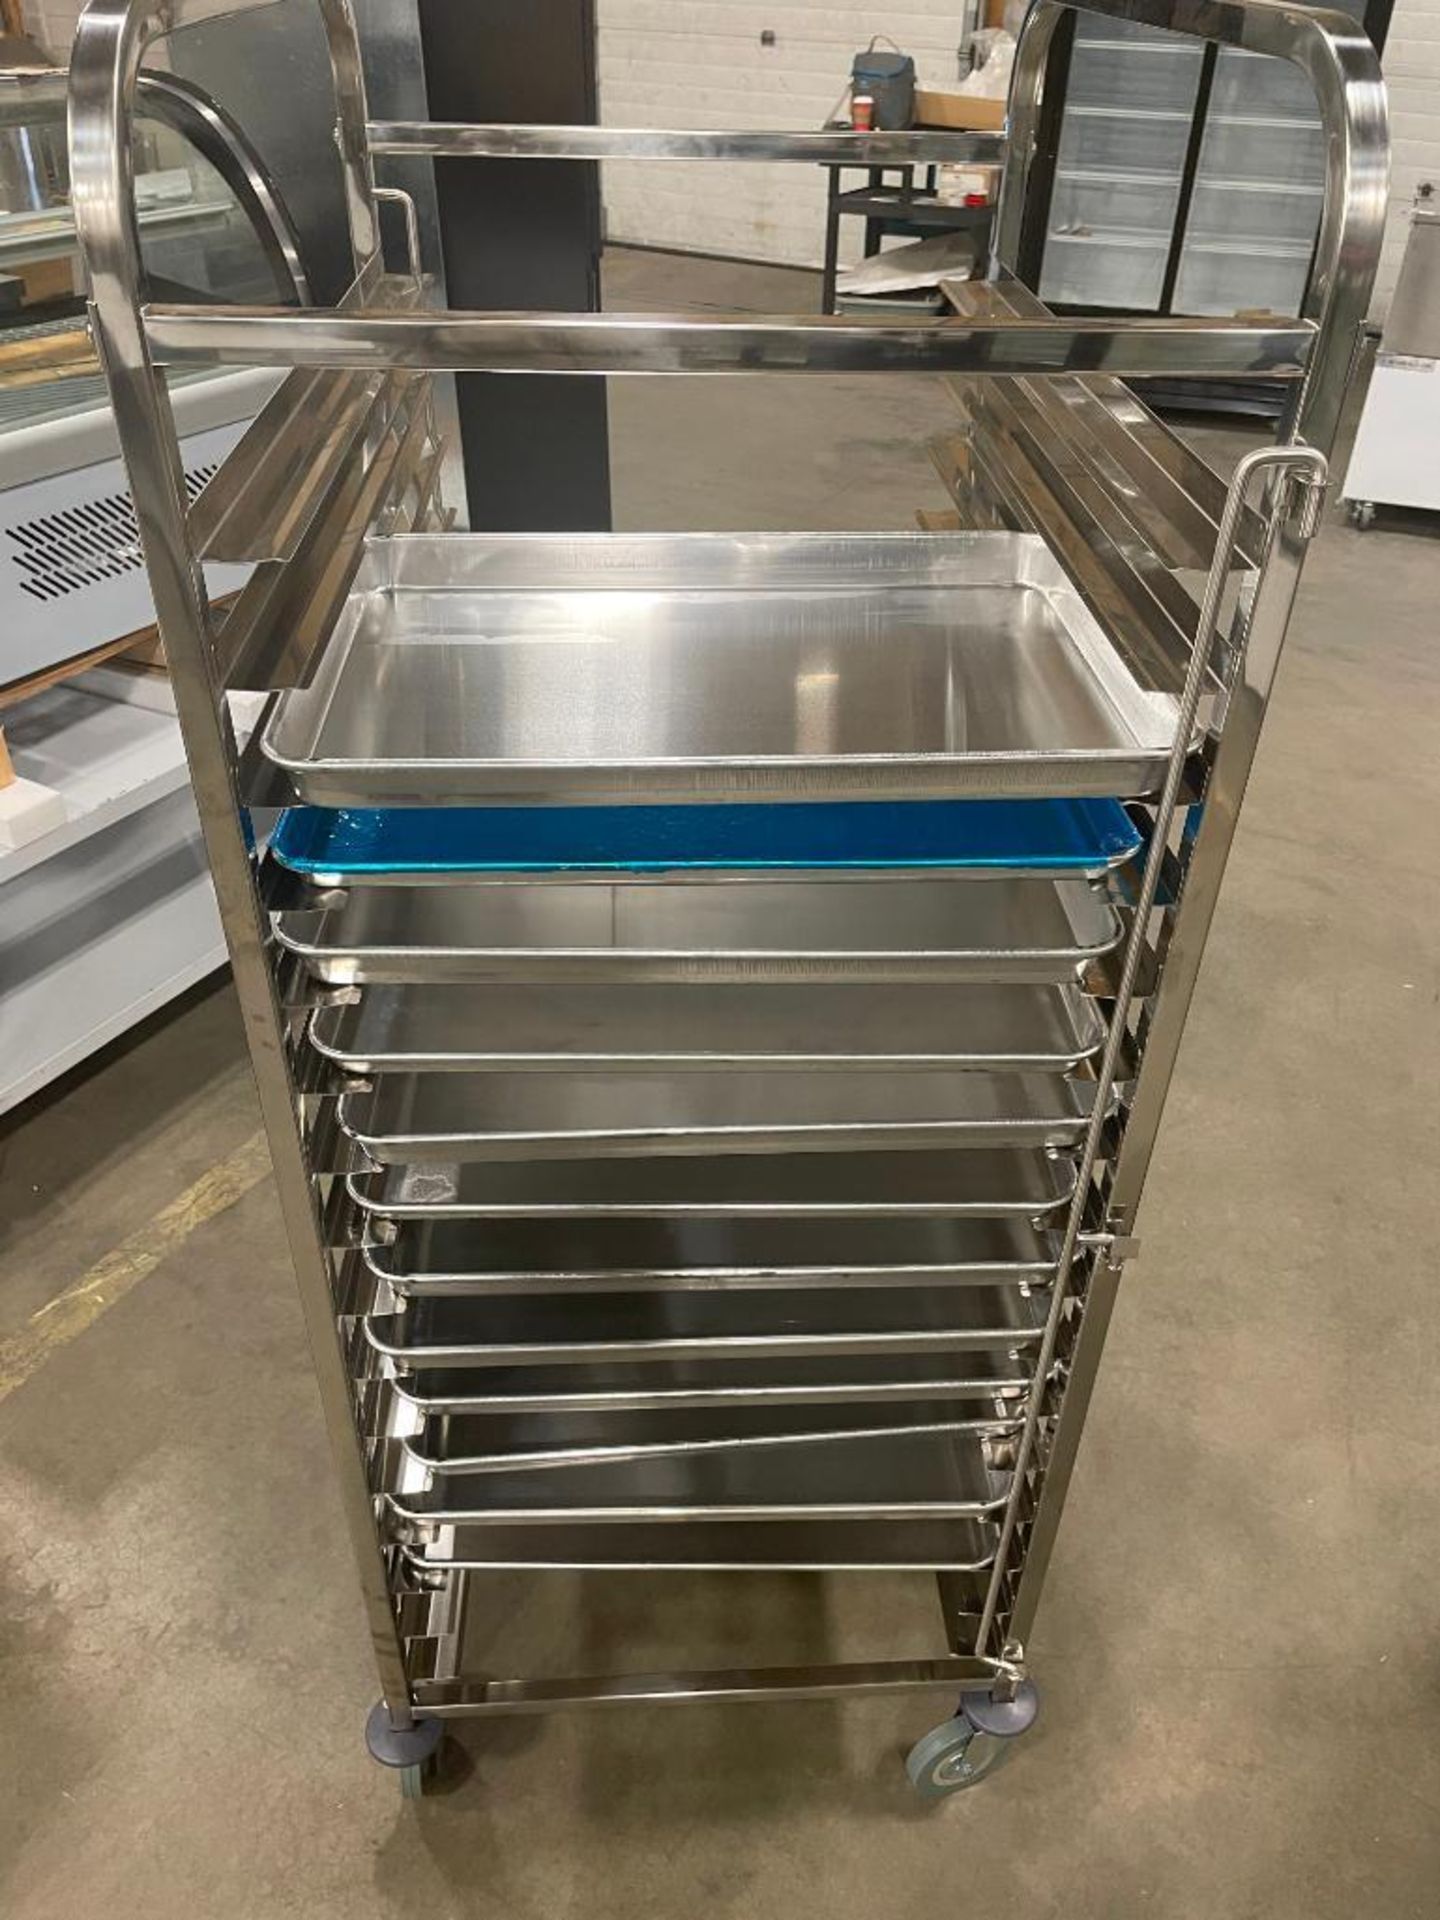 NEW STAINLESS STEEL 16-SLOT OVERSIZED BUN PAN RACK WITH PAN GUARD & (22) PANS - Image 6 of 8